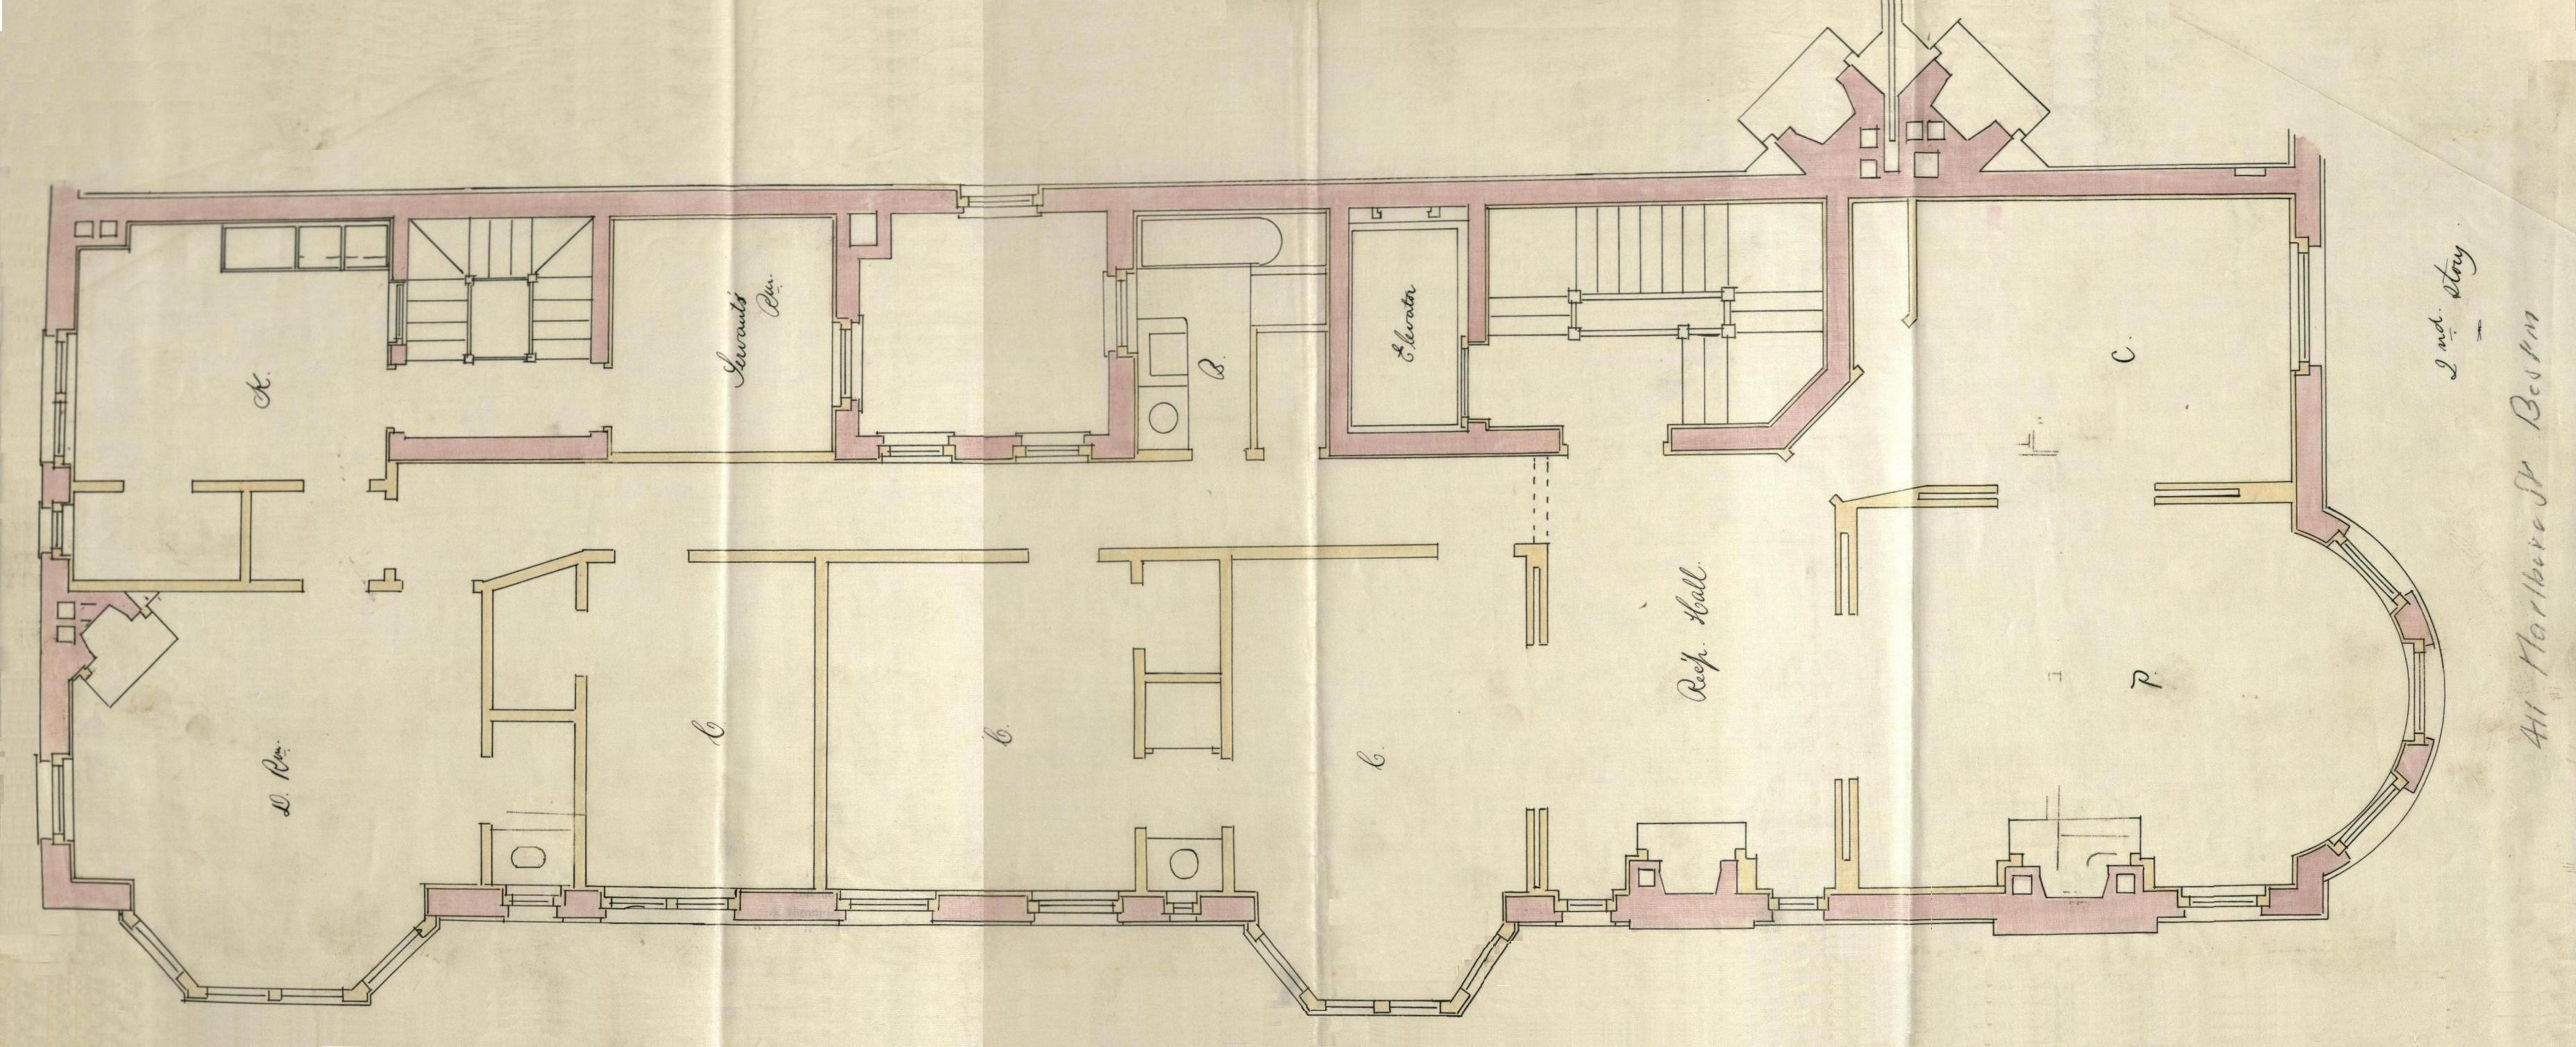 Second floor plan of 411 Marlborough bound with the final building inspection report 21Oct1891 v. 41 p. 52 courtesy of the Boston Public Library Arts Department